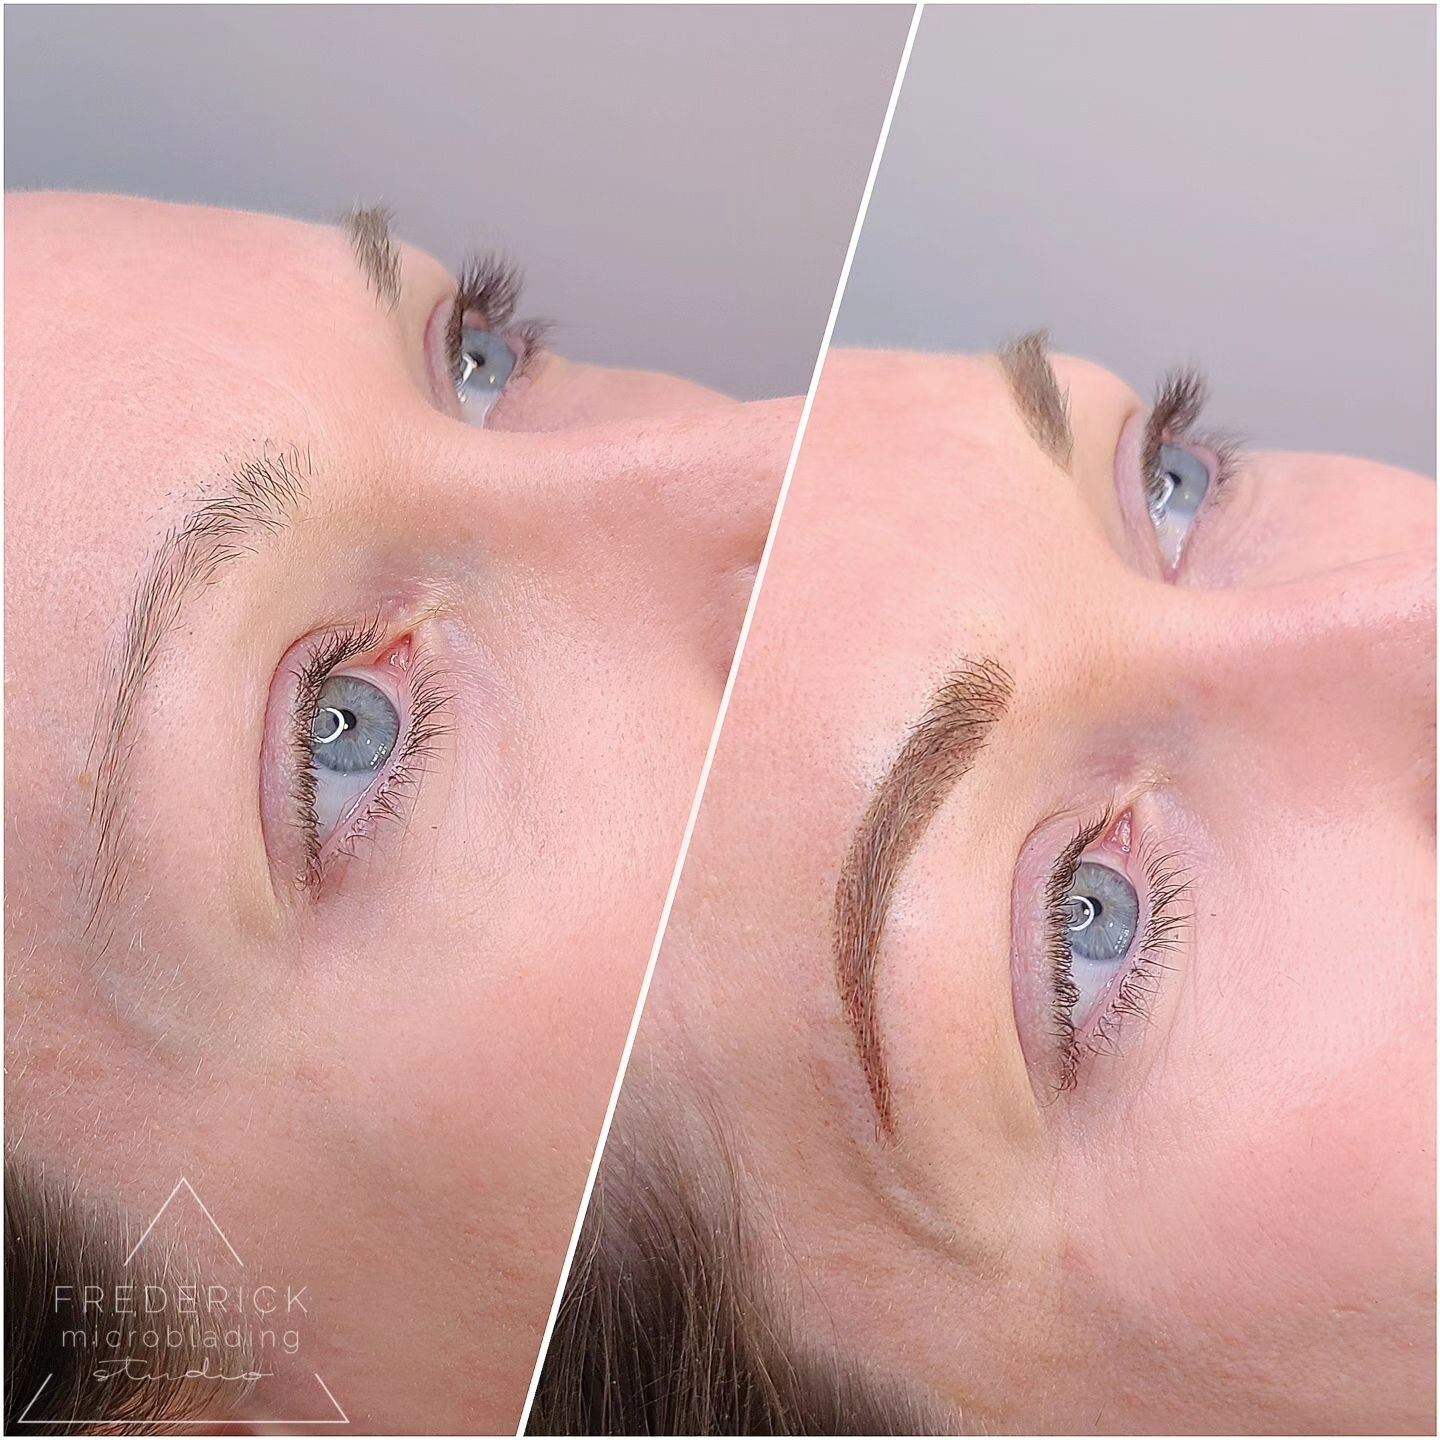 🌿 Embrace your natural beauty with a new brow shape that stays within your natural hairline! ✨ Say goodbye to harsh lines and hello to a more soft brow shape that enhances your features 🌿
#NaturalBrowBeauty  #BrowTransformation #BrowGoals #BeautyTi